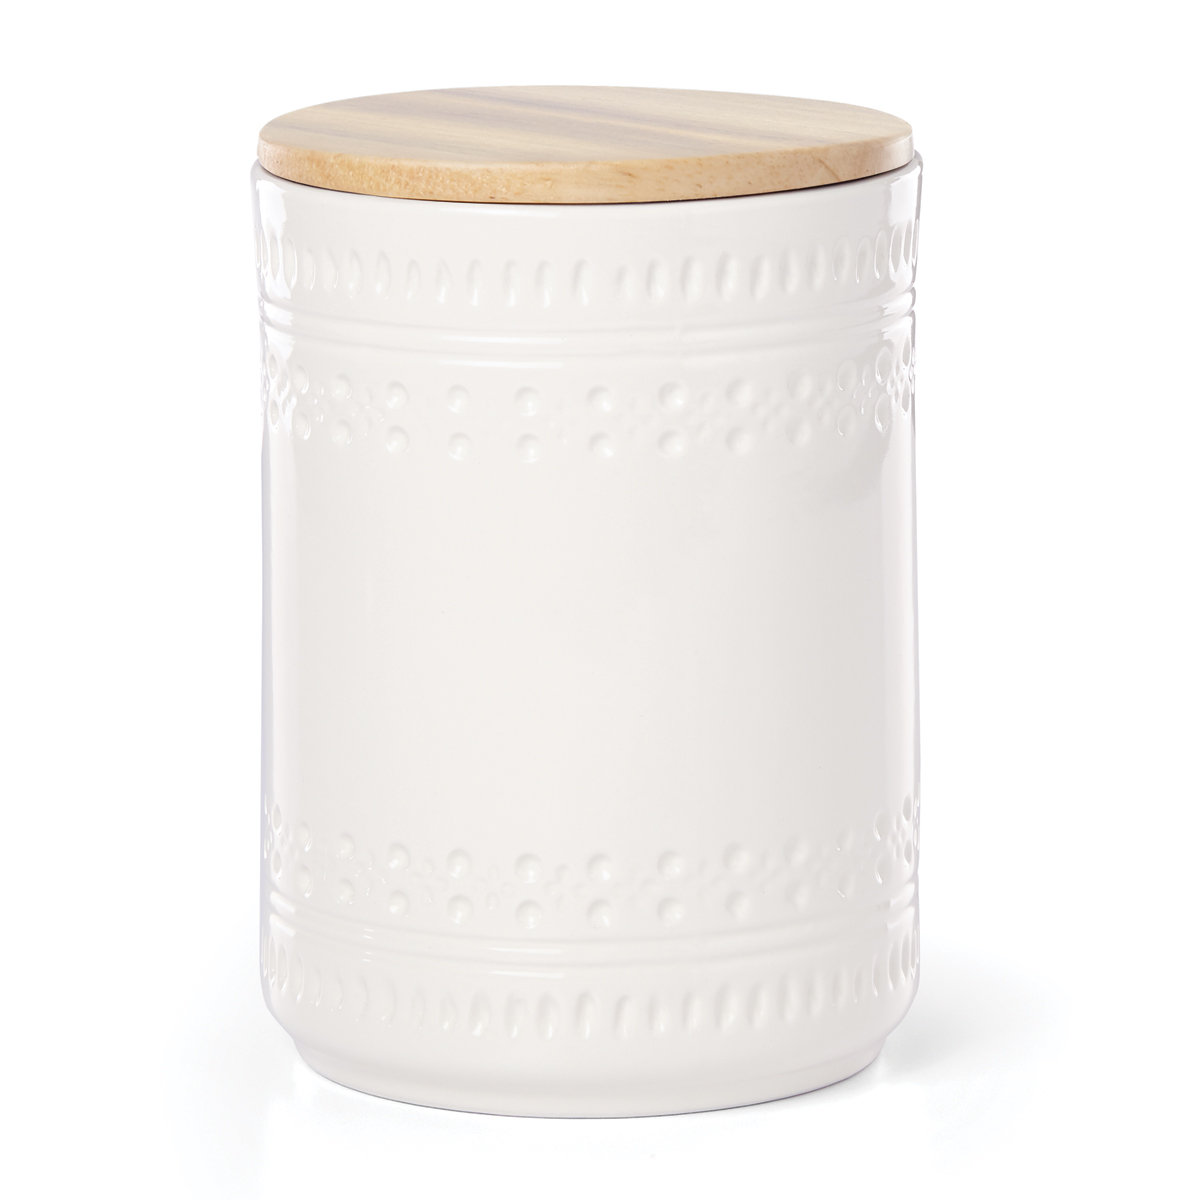 Kate Spade China by Lenox, Stoneware Willow Drive Cream Small Canister